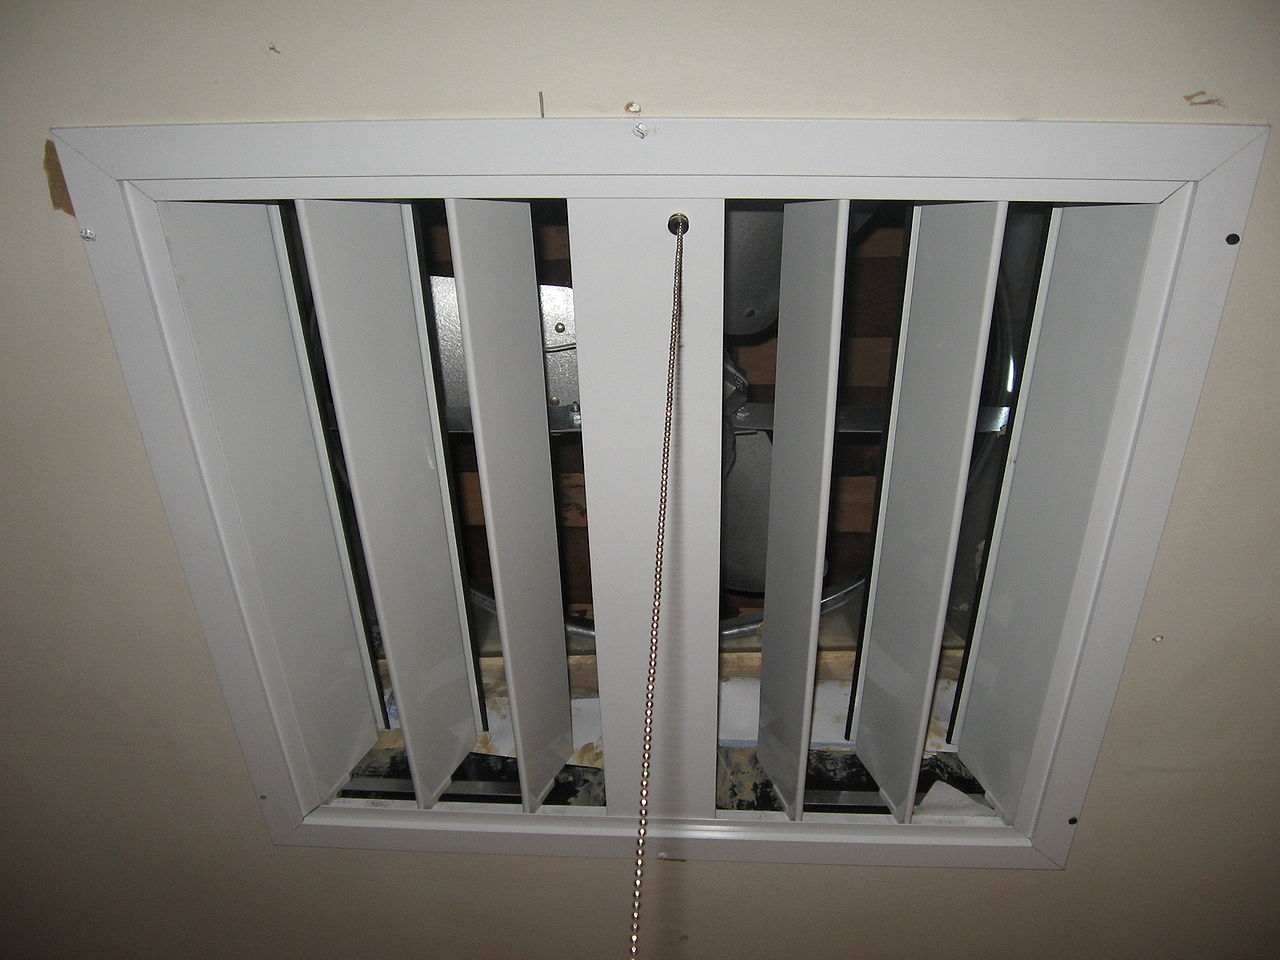 Berygtet frisør ventilation Considerations When Using Whole House Fans - San Diego CA